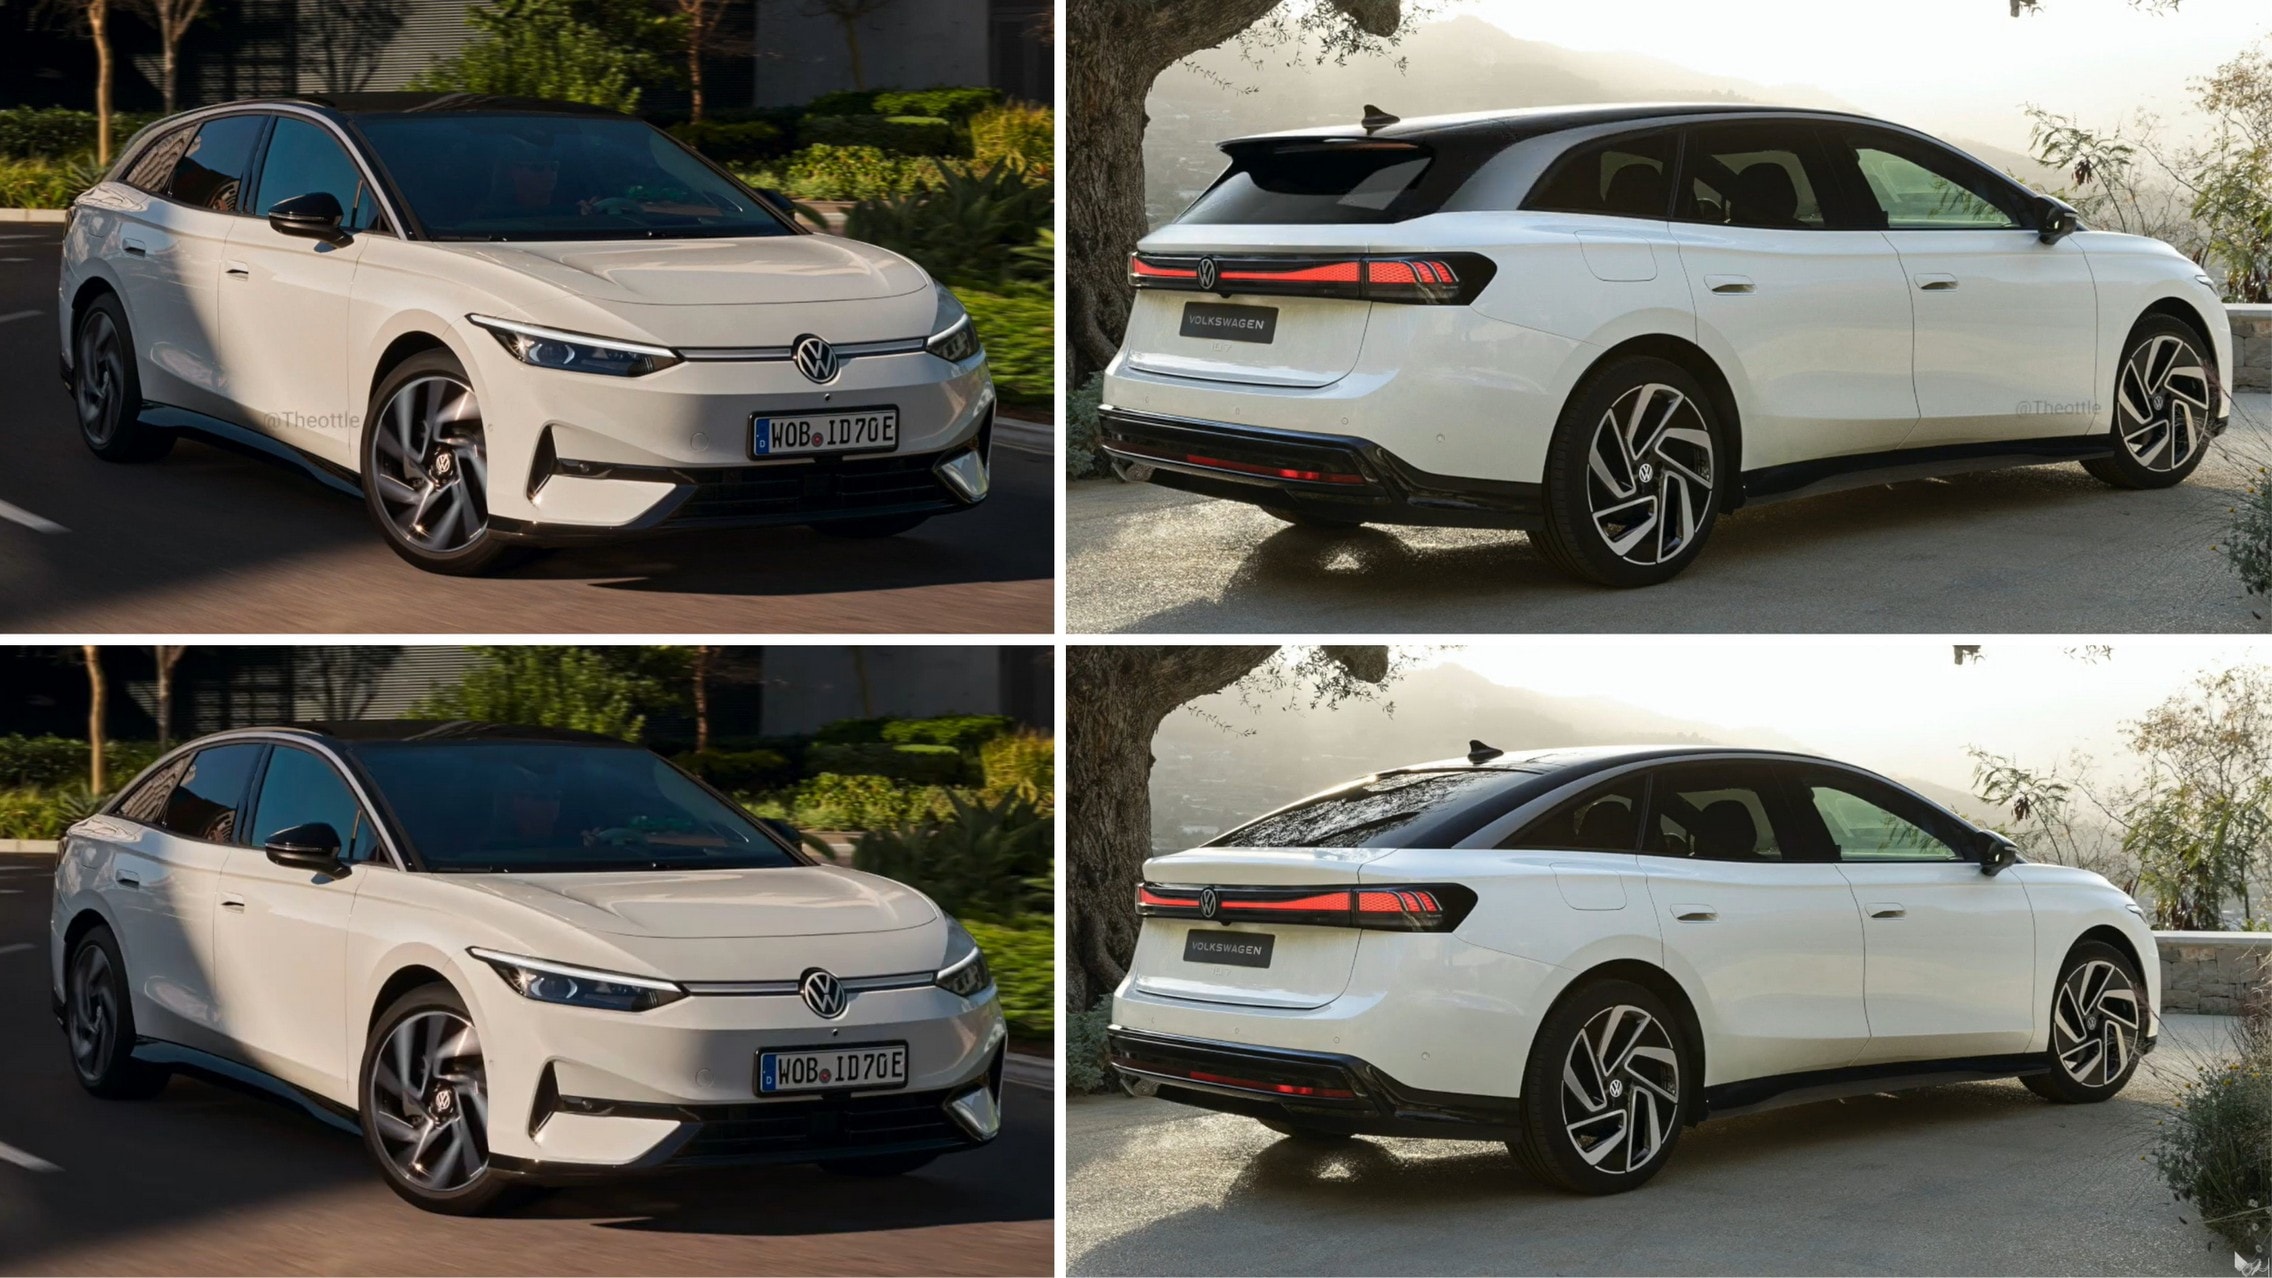 https://s1.cdn.autoevolution.com/images/news/volkswagen-id7-variant-would-be-perfect-for-a-slap-in-tesla-model-3-s-face-if-real-213898_1.jpg